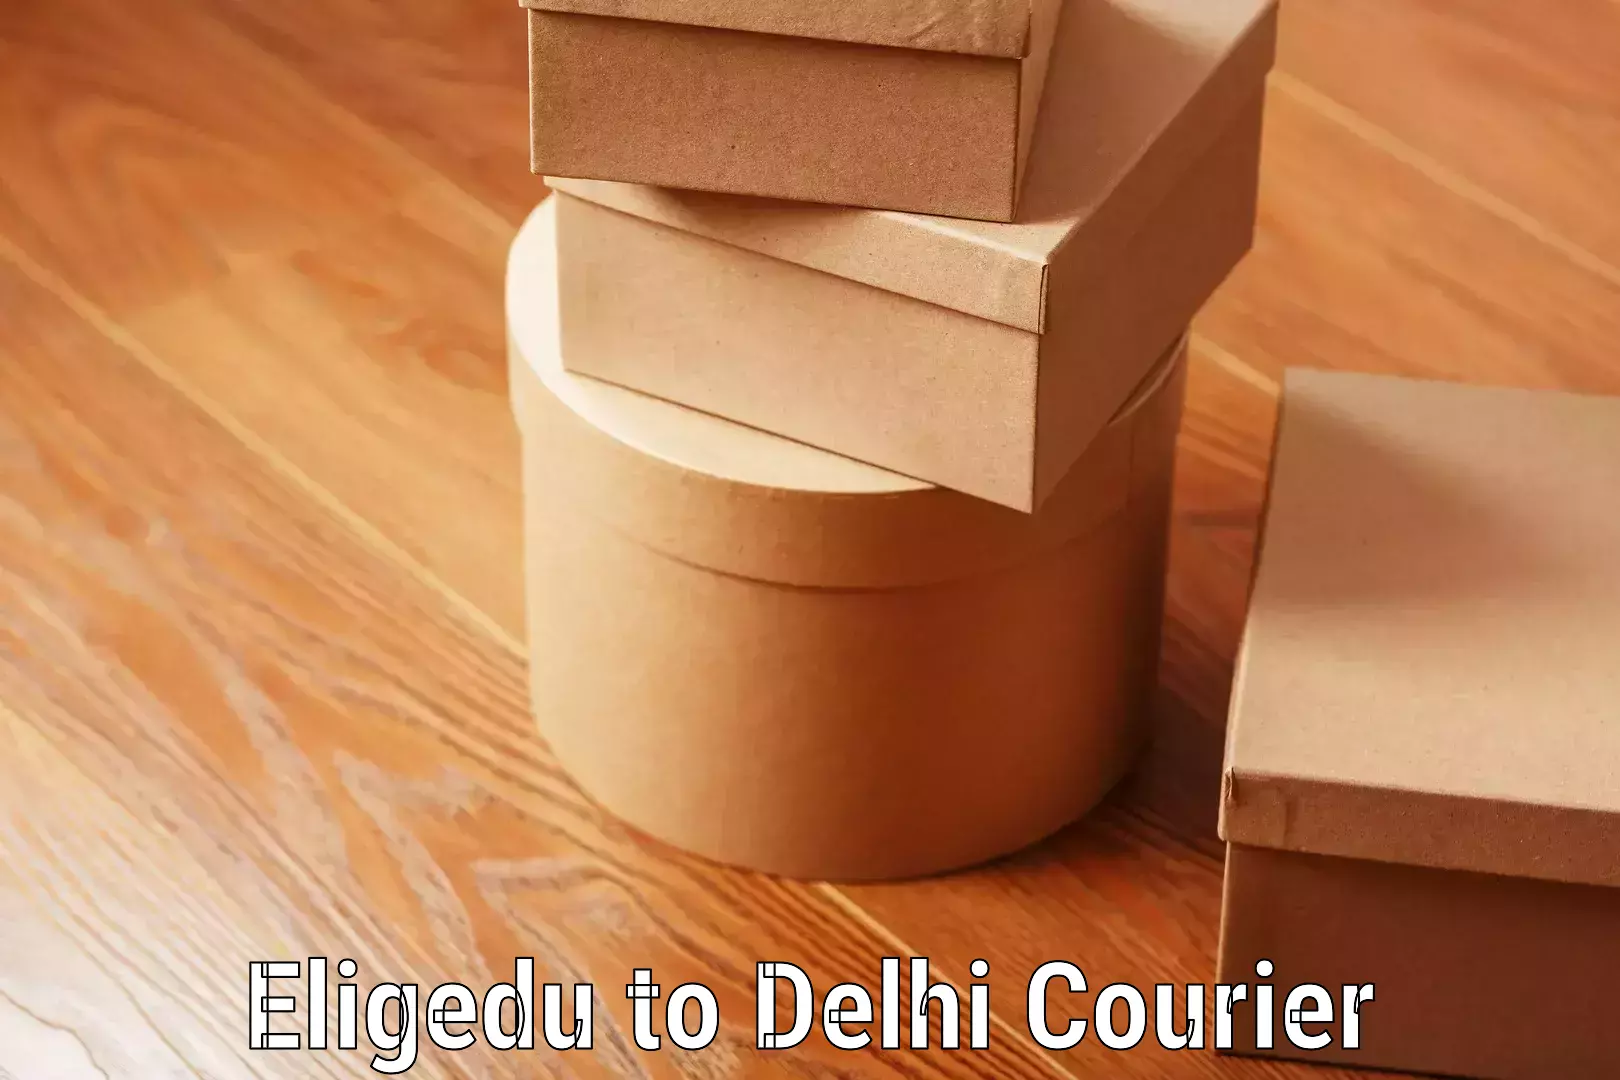 Personal luggage delivery in Eligedu to Delhi